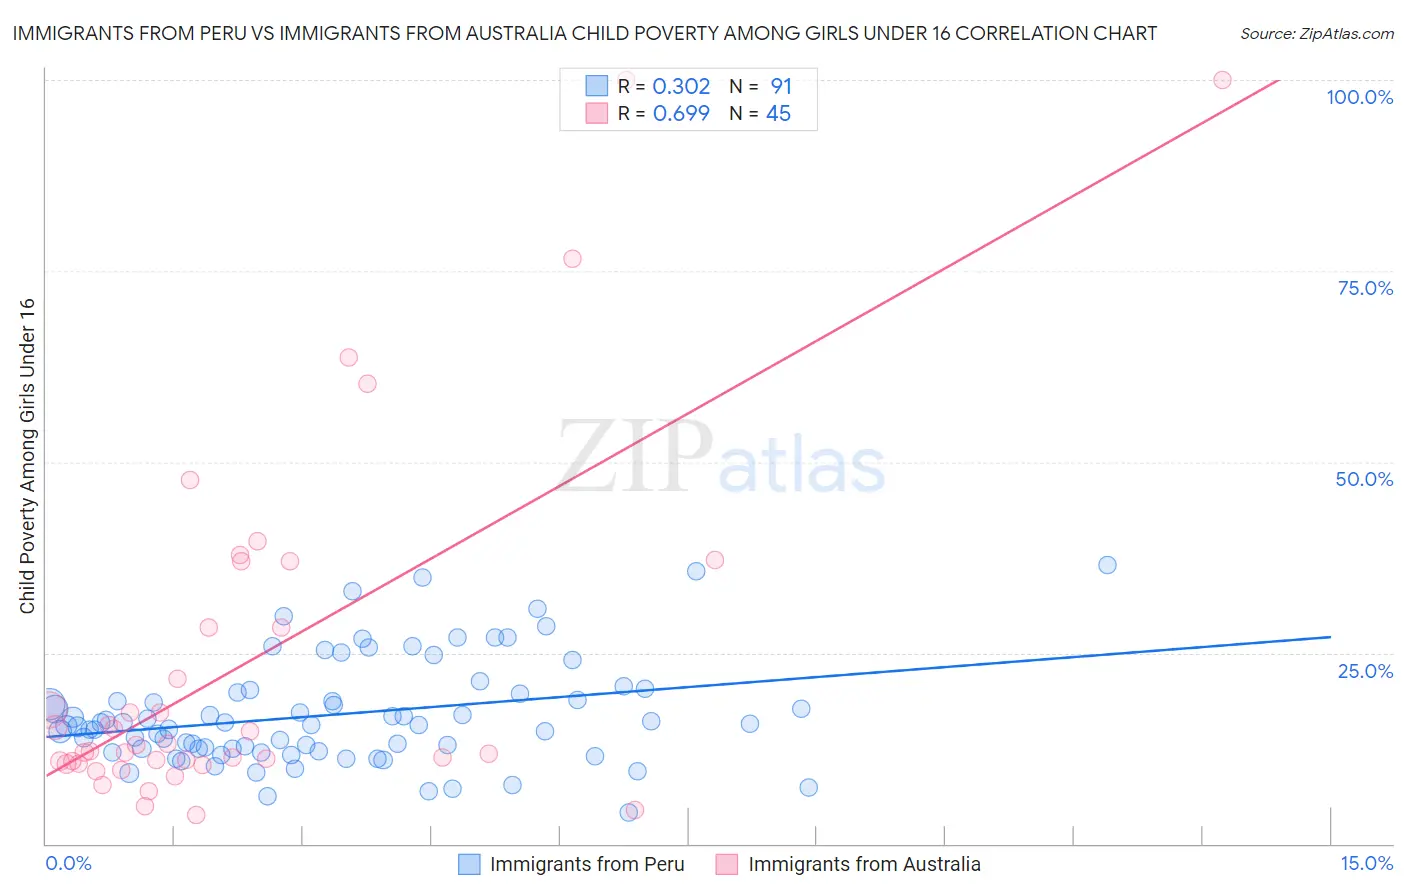 Immigrants from Peru vs Immigrants from Australia Child Poverty Among Girls Under 16